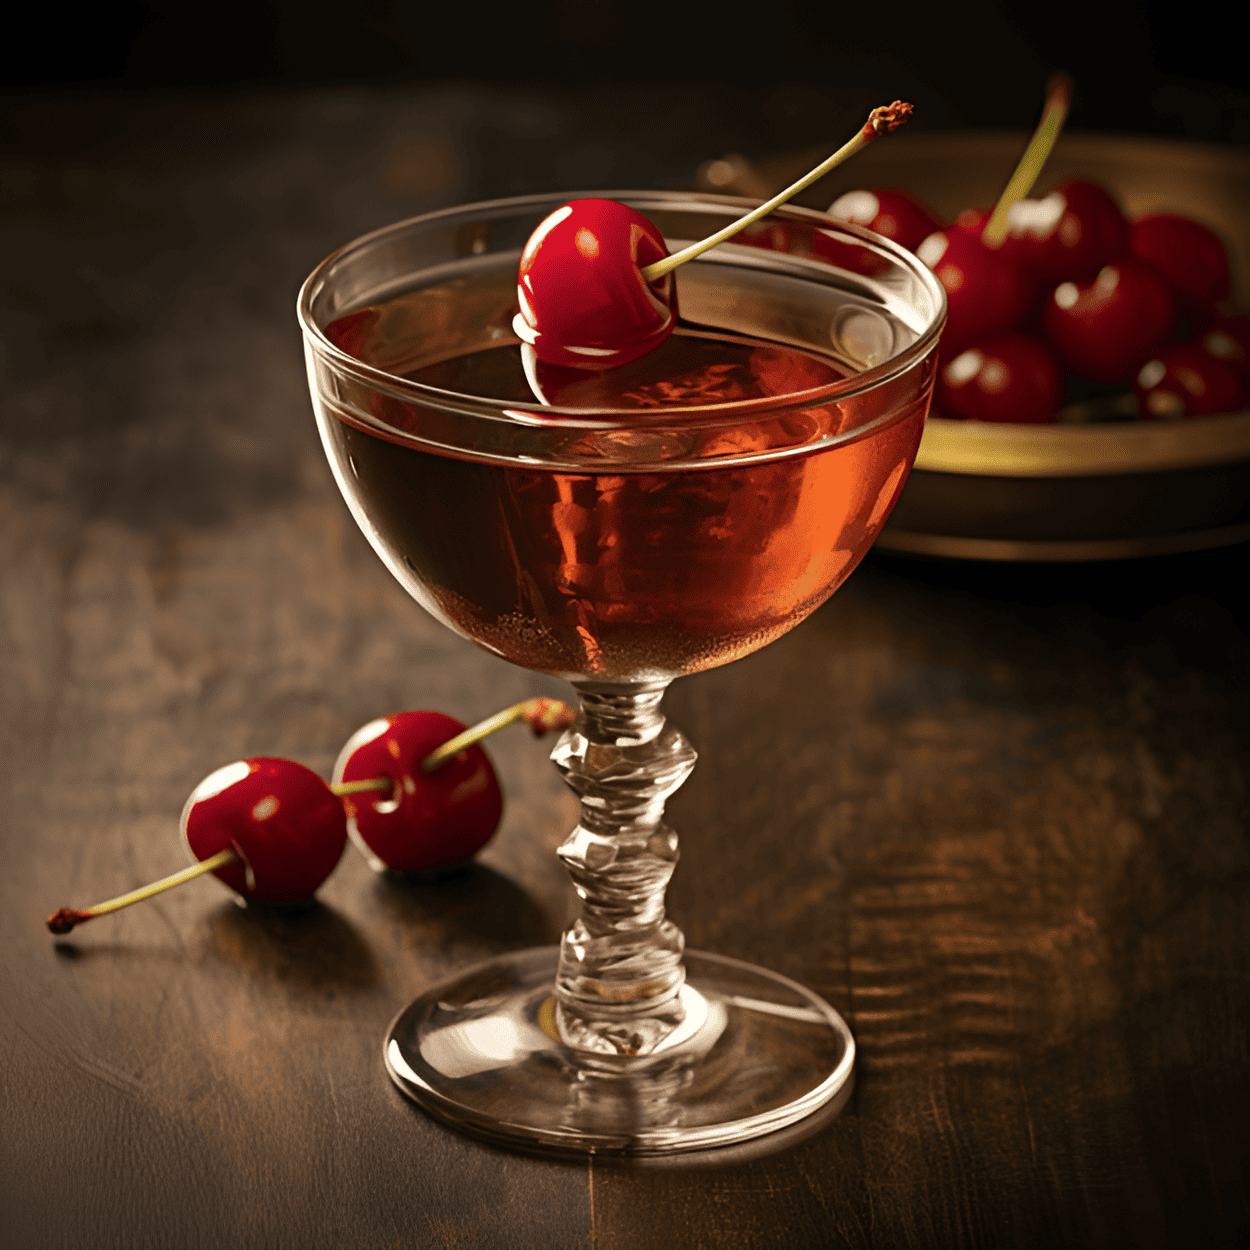 Maple Manhattan Cocktail Recipe - The Maple Manhattan is a harmonious blend of strong, smooth, and sweet. The whiskey provides a robust and smoky base, the vermouth adds a hint of bitterness, and the maple syrup brings a rich sweetness. The overall taste is complex, with the sweetness of the maple syrup perfectly balancing the strength of the whiskey.